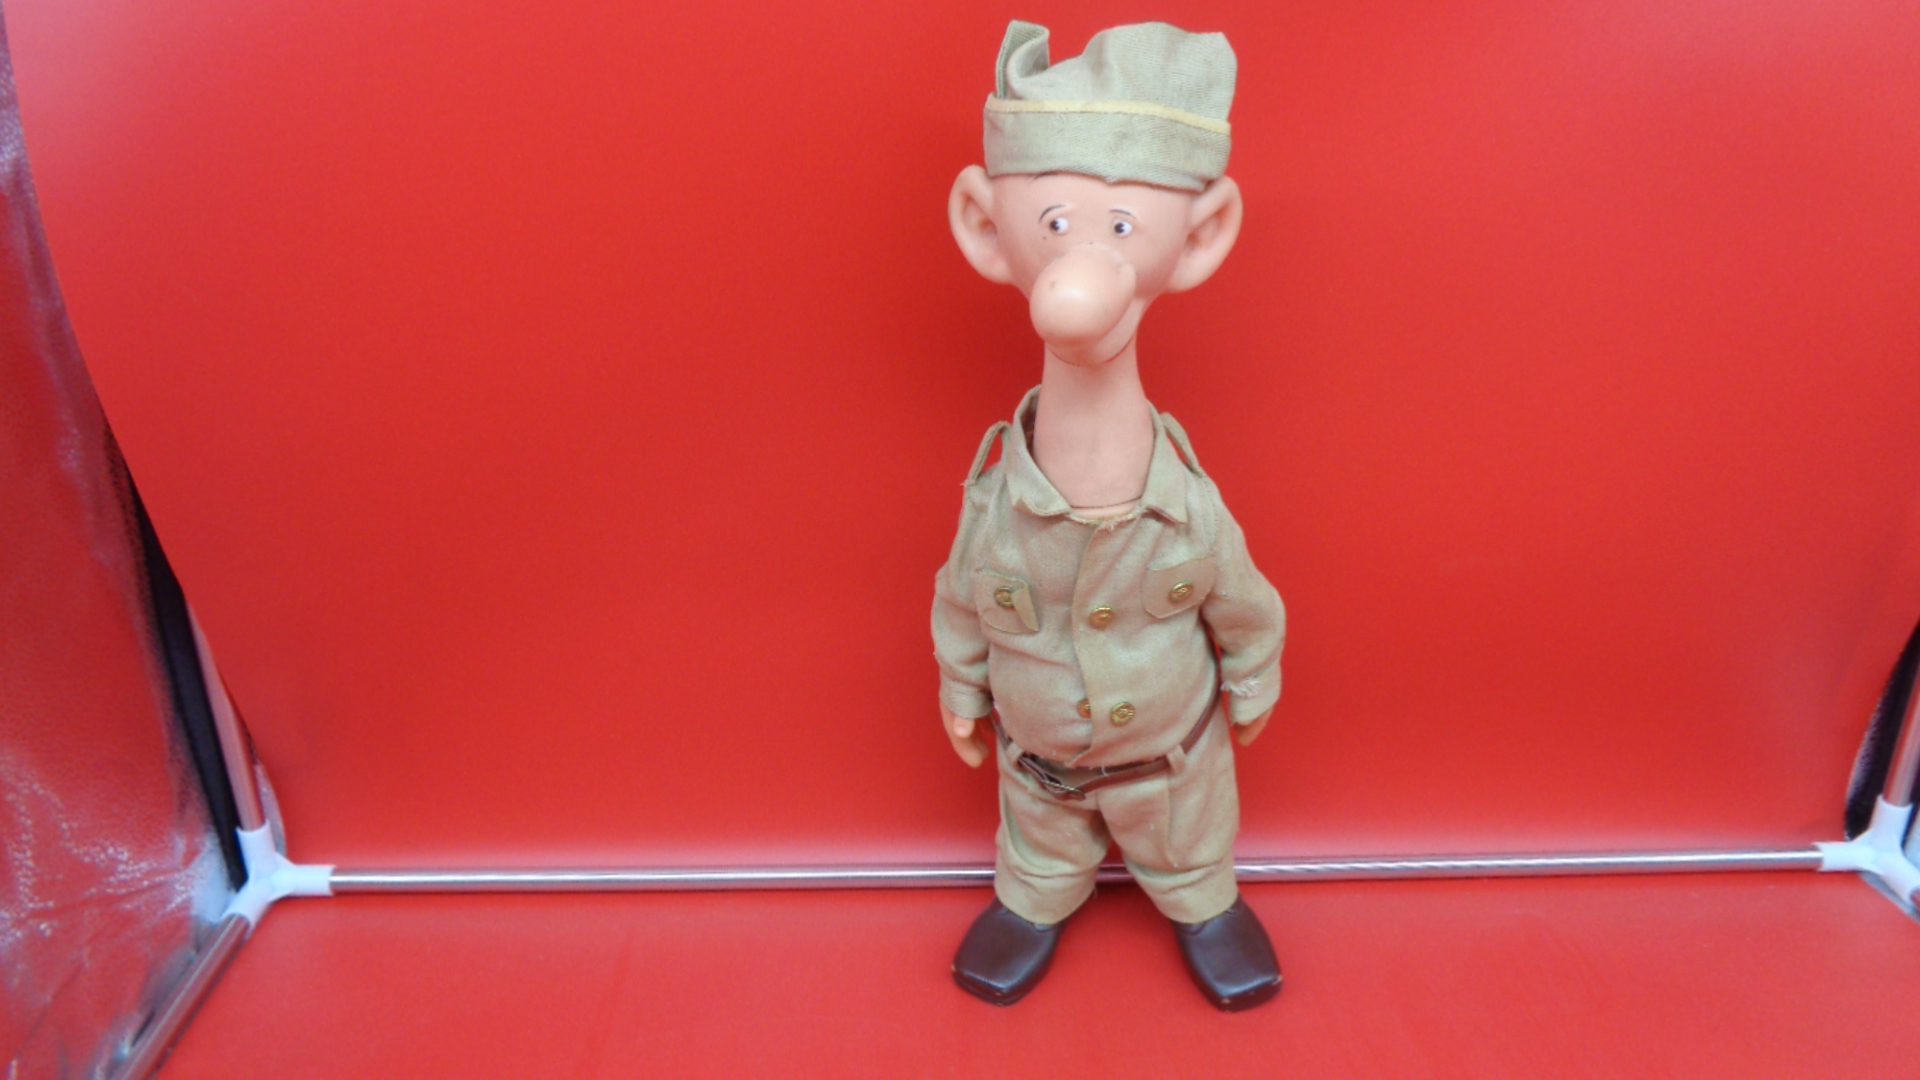 Display of front view of US Military US Army Sad Sack Doll